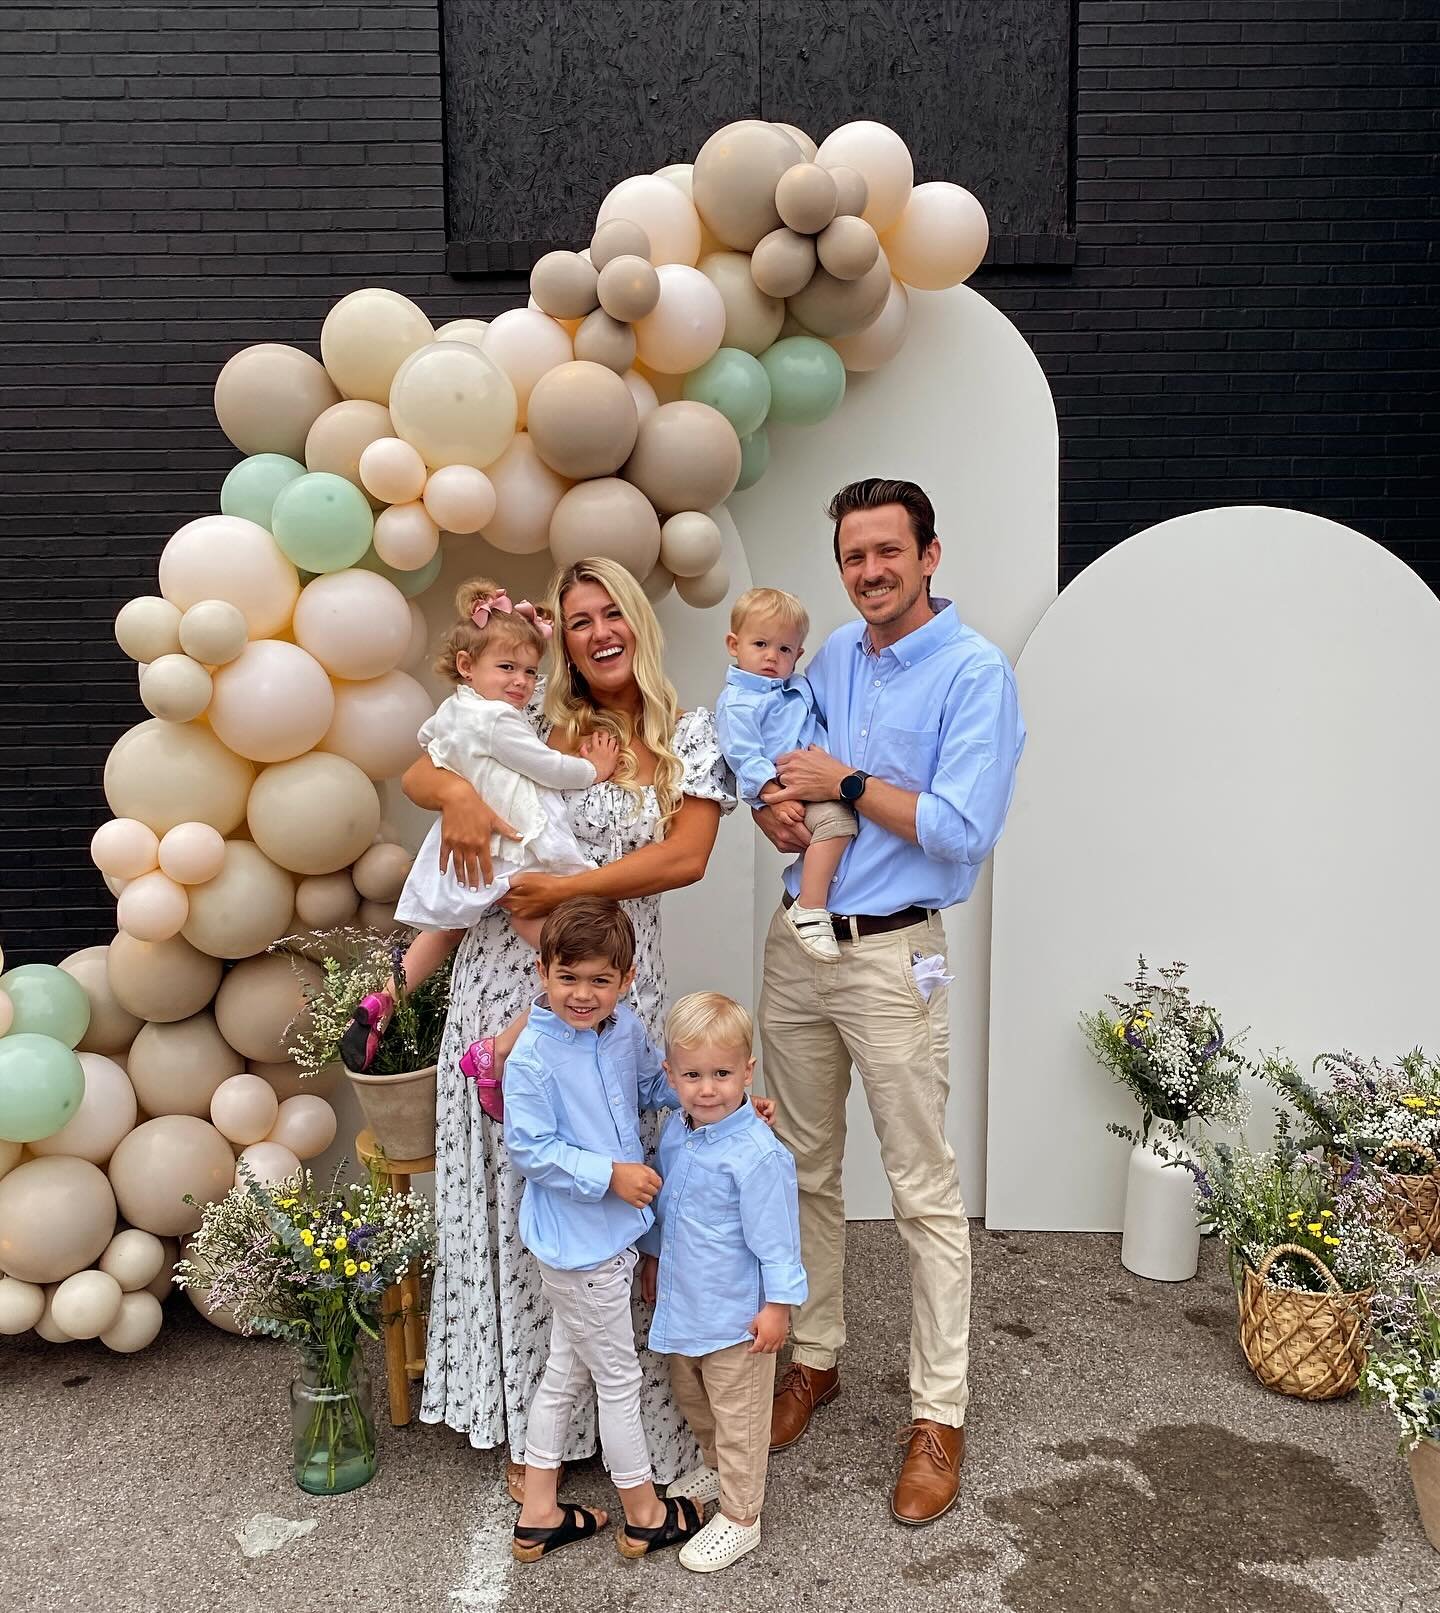 Happy Easter from our family to yours! 
-
-
We loved making these arches for @waychurchtn